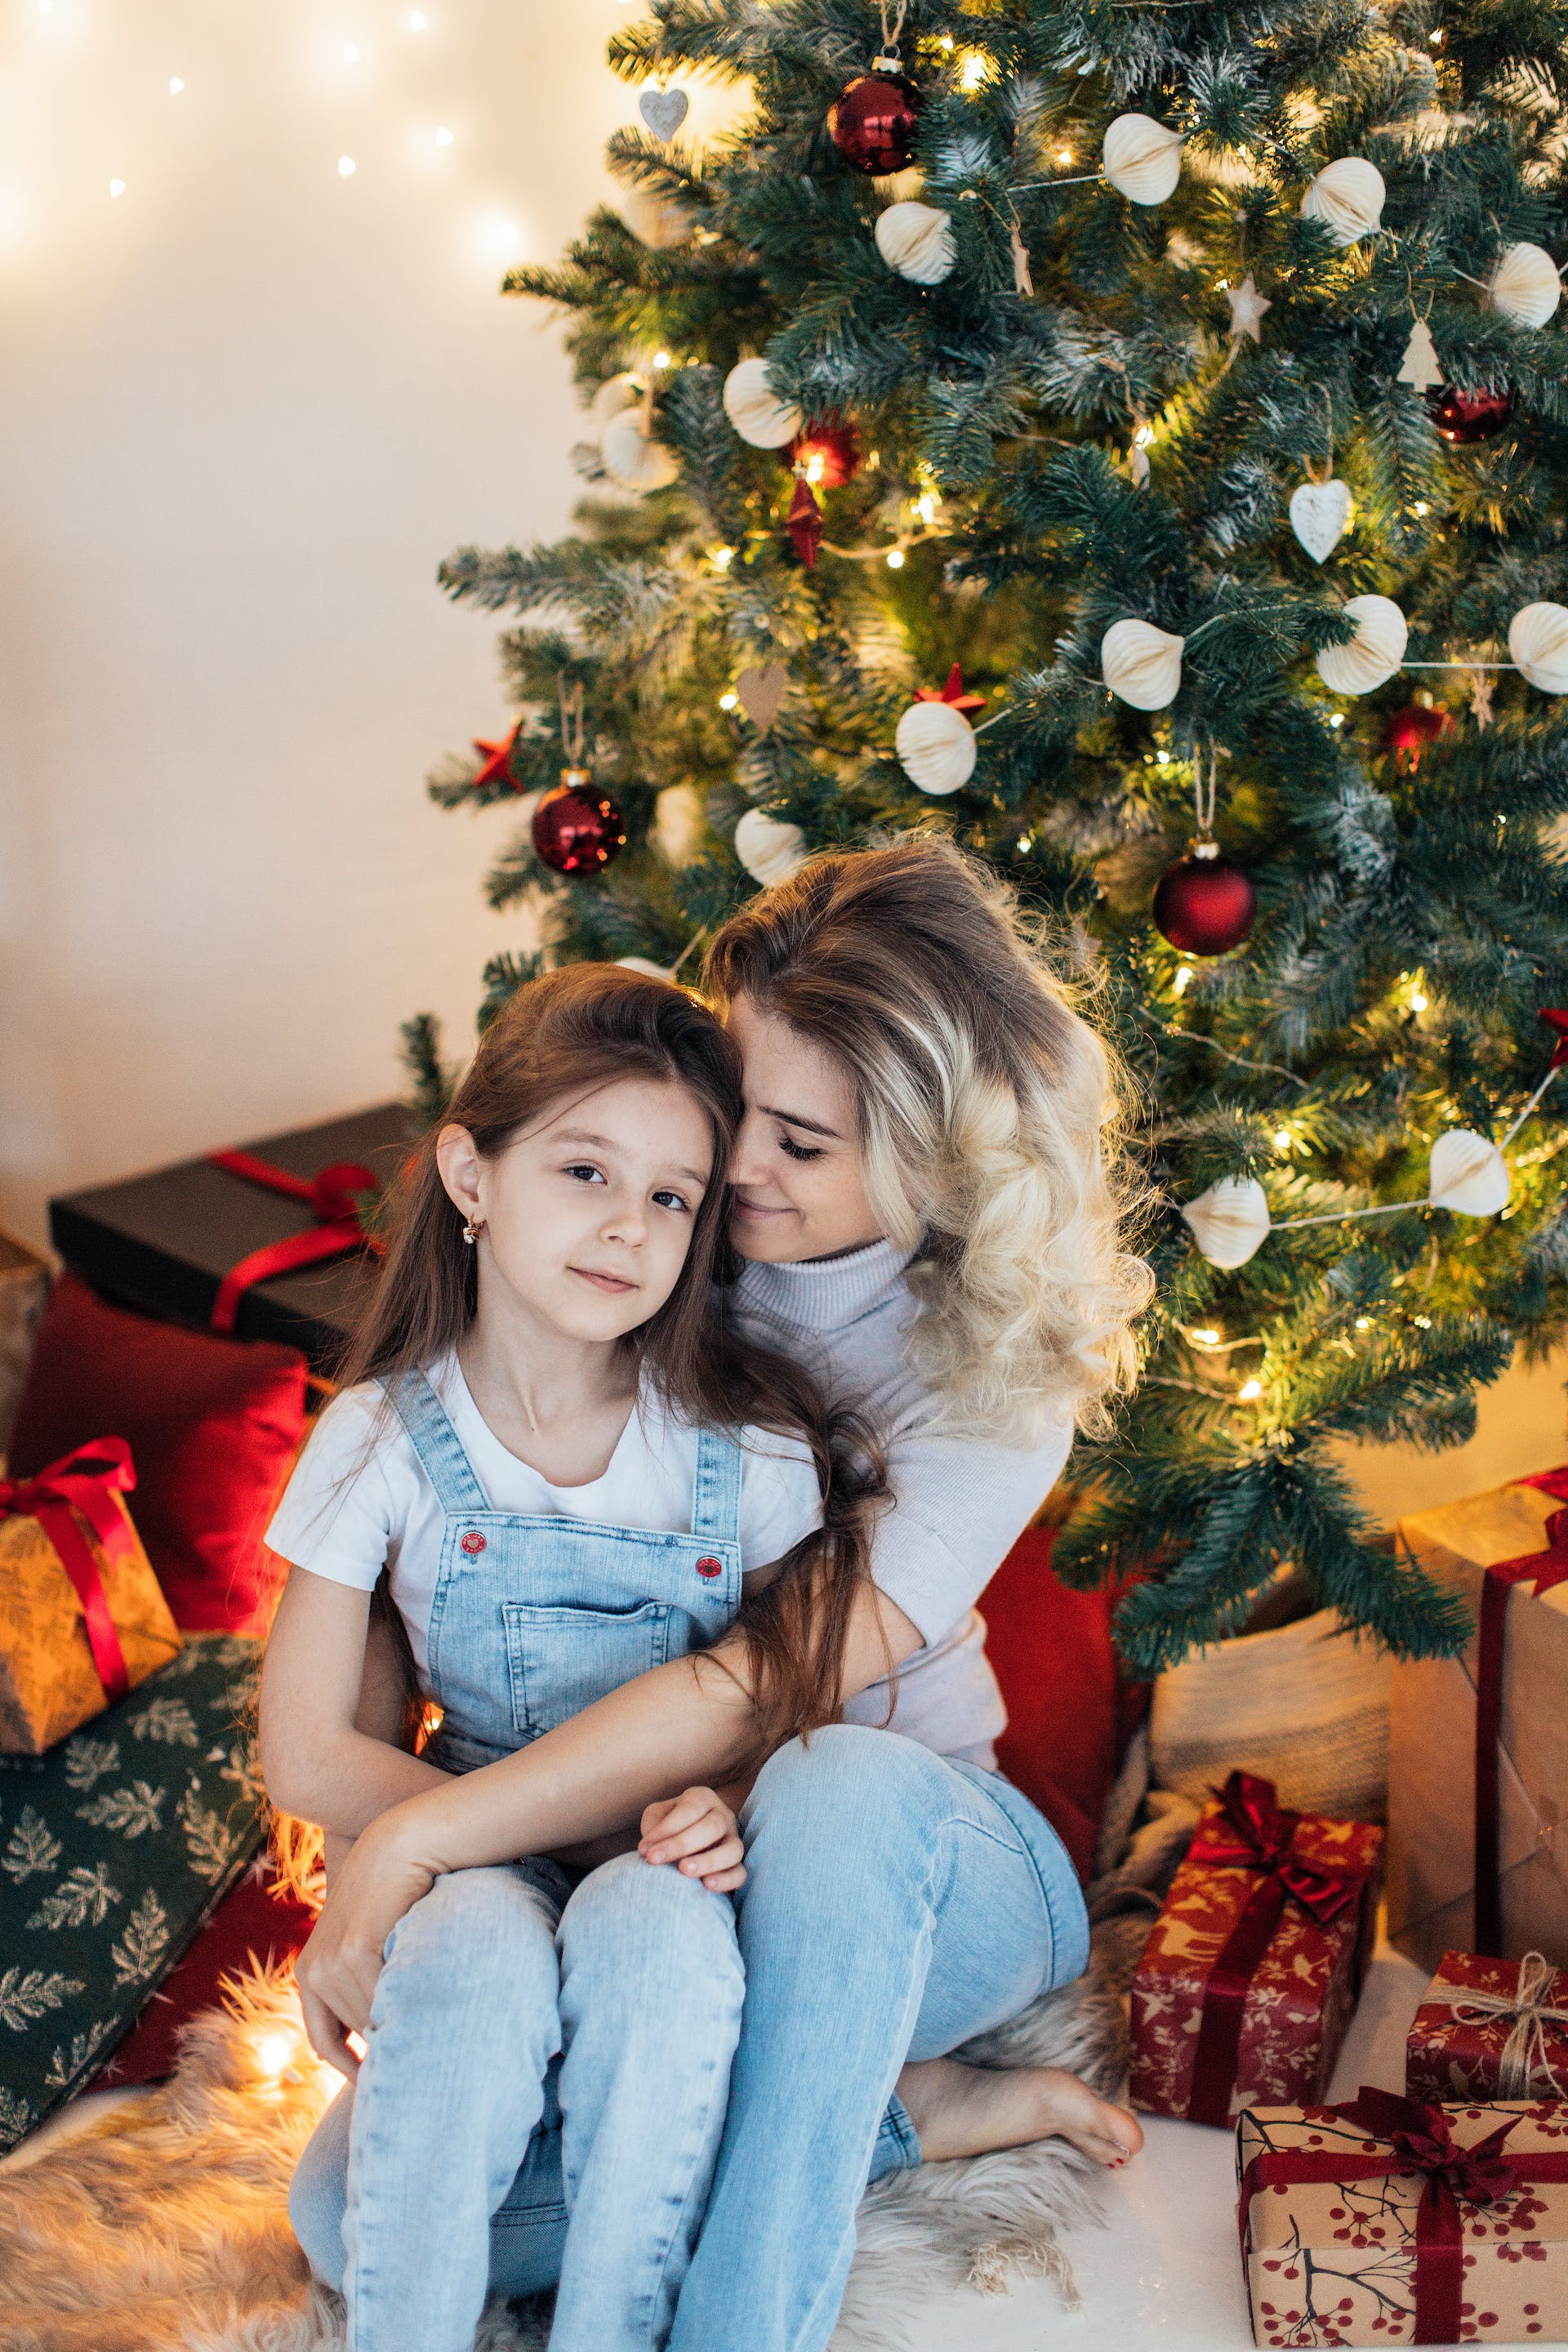 A mother hugging her daughter while sitting next to a Christmas tree | Source: Pexels